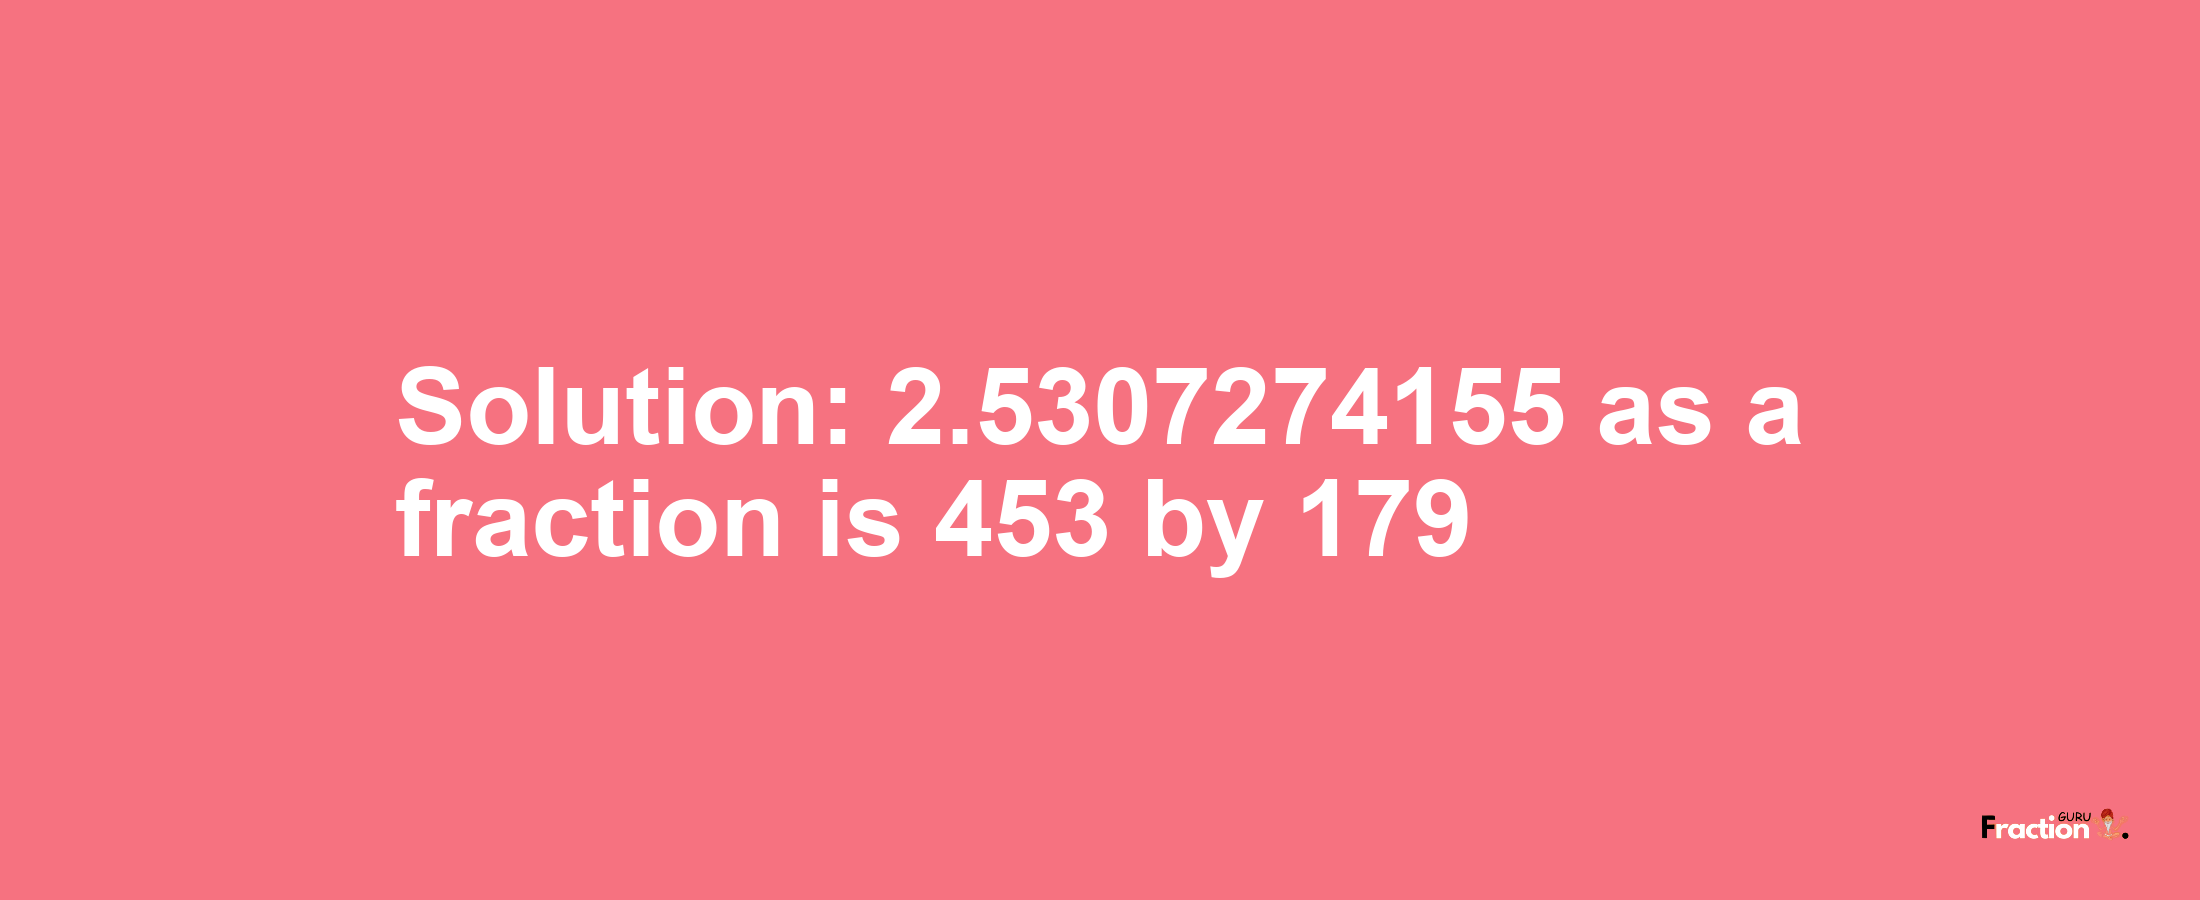 Solution:2.5307274155 as a fraction is 453/179